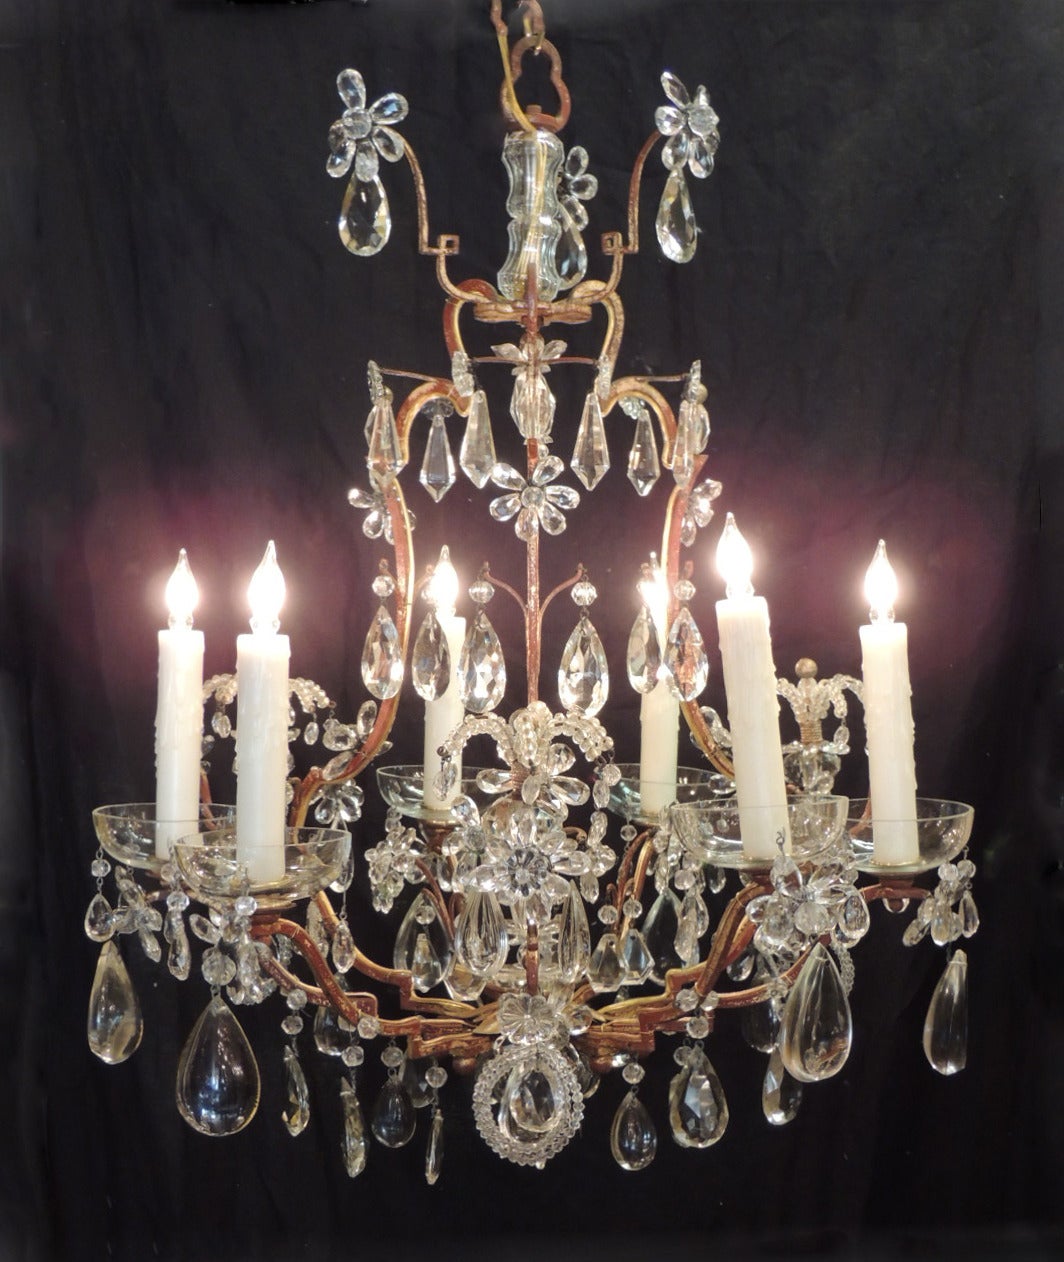 This chandelier was made in France during the first half of the 20th century, circa 1930. It has an iron and tole frame covered in varied shapes and sizes of crystal prisms. The apex of the piece has crystal rosettes and beads. The eight arms are